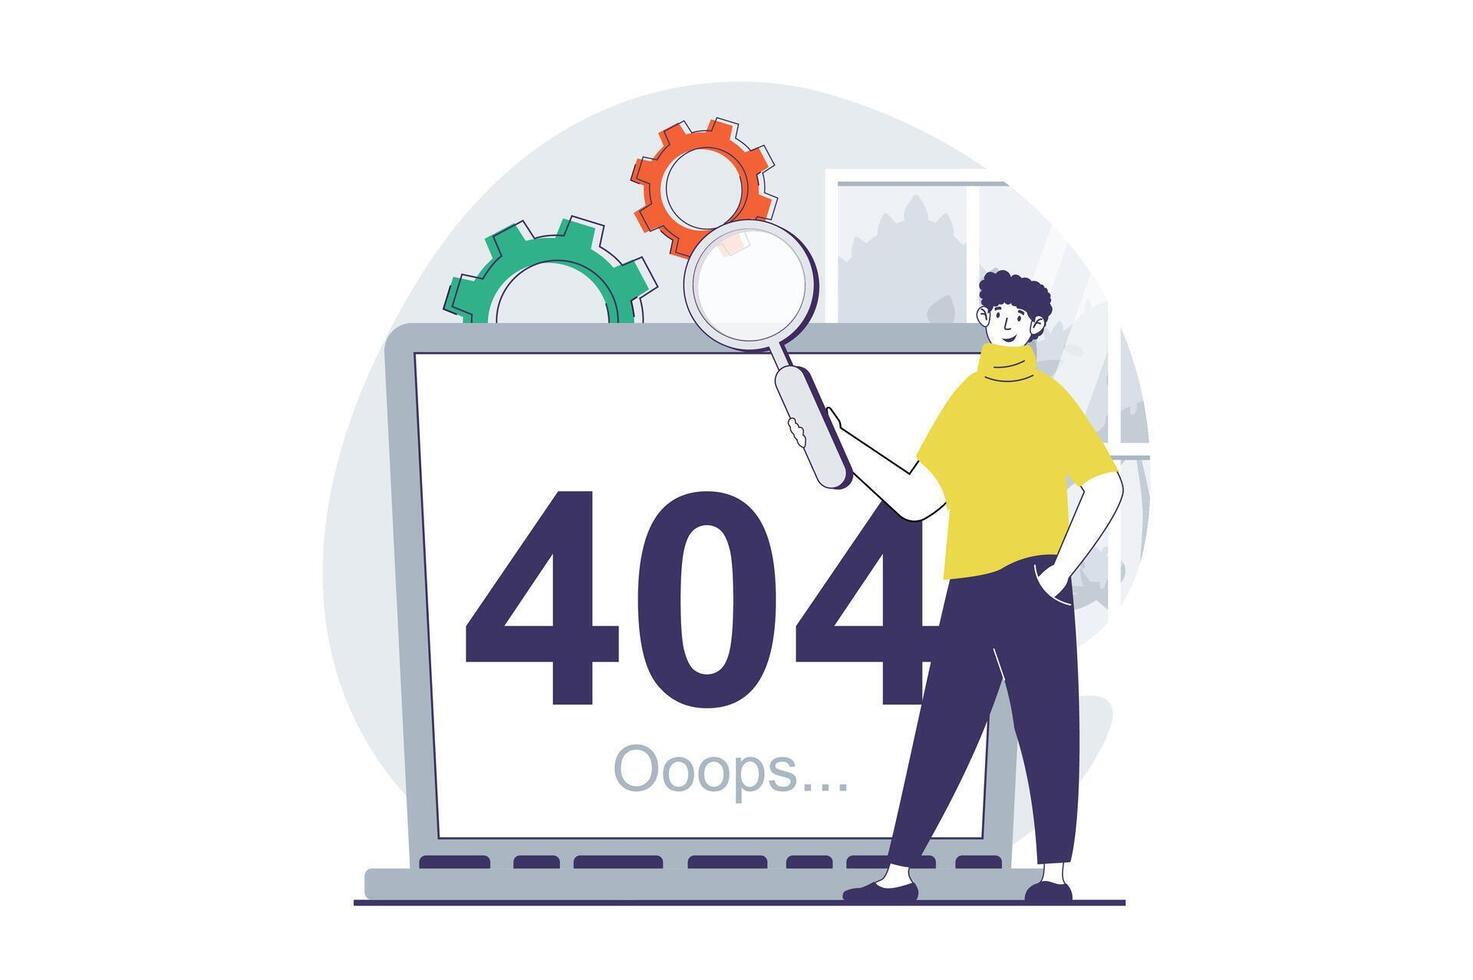 Page not found concept with people scene in flat design for web. Man researching disconnect problem and error message on laptop screen. Vector illustration for social media banner, marketing material.